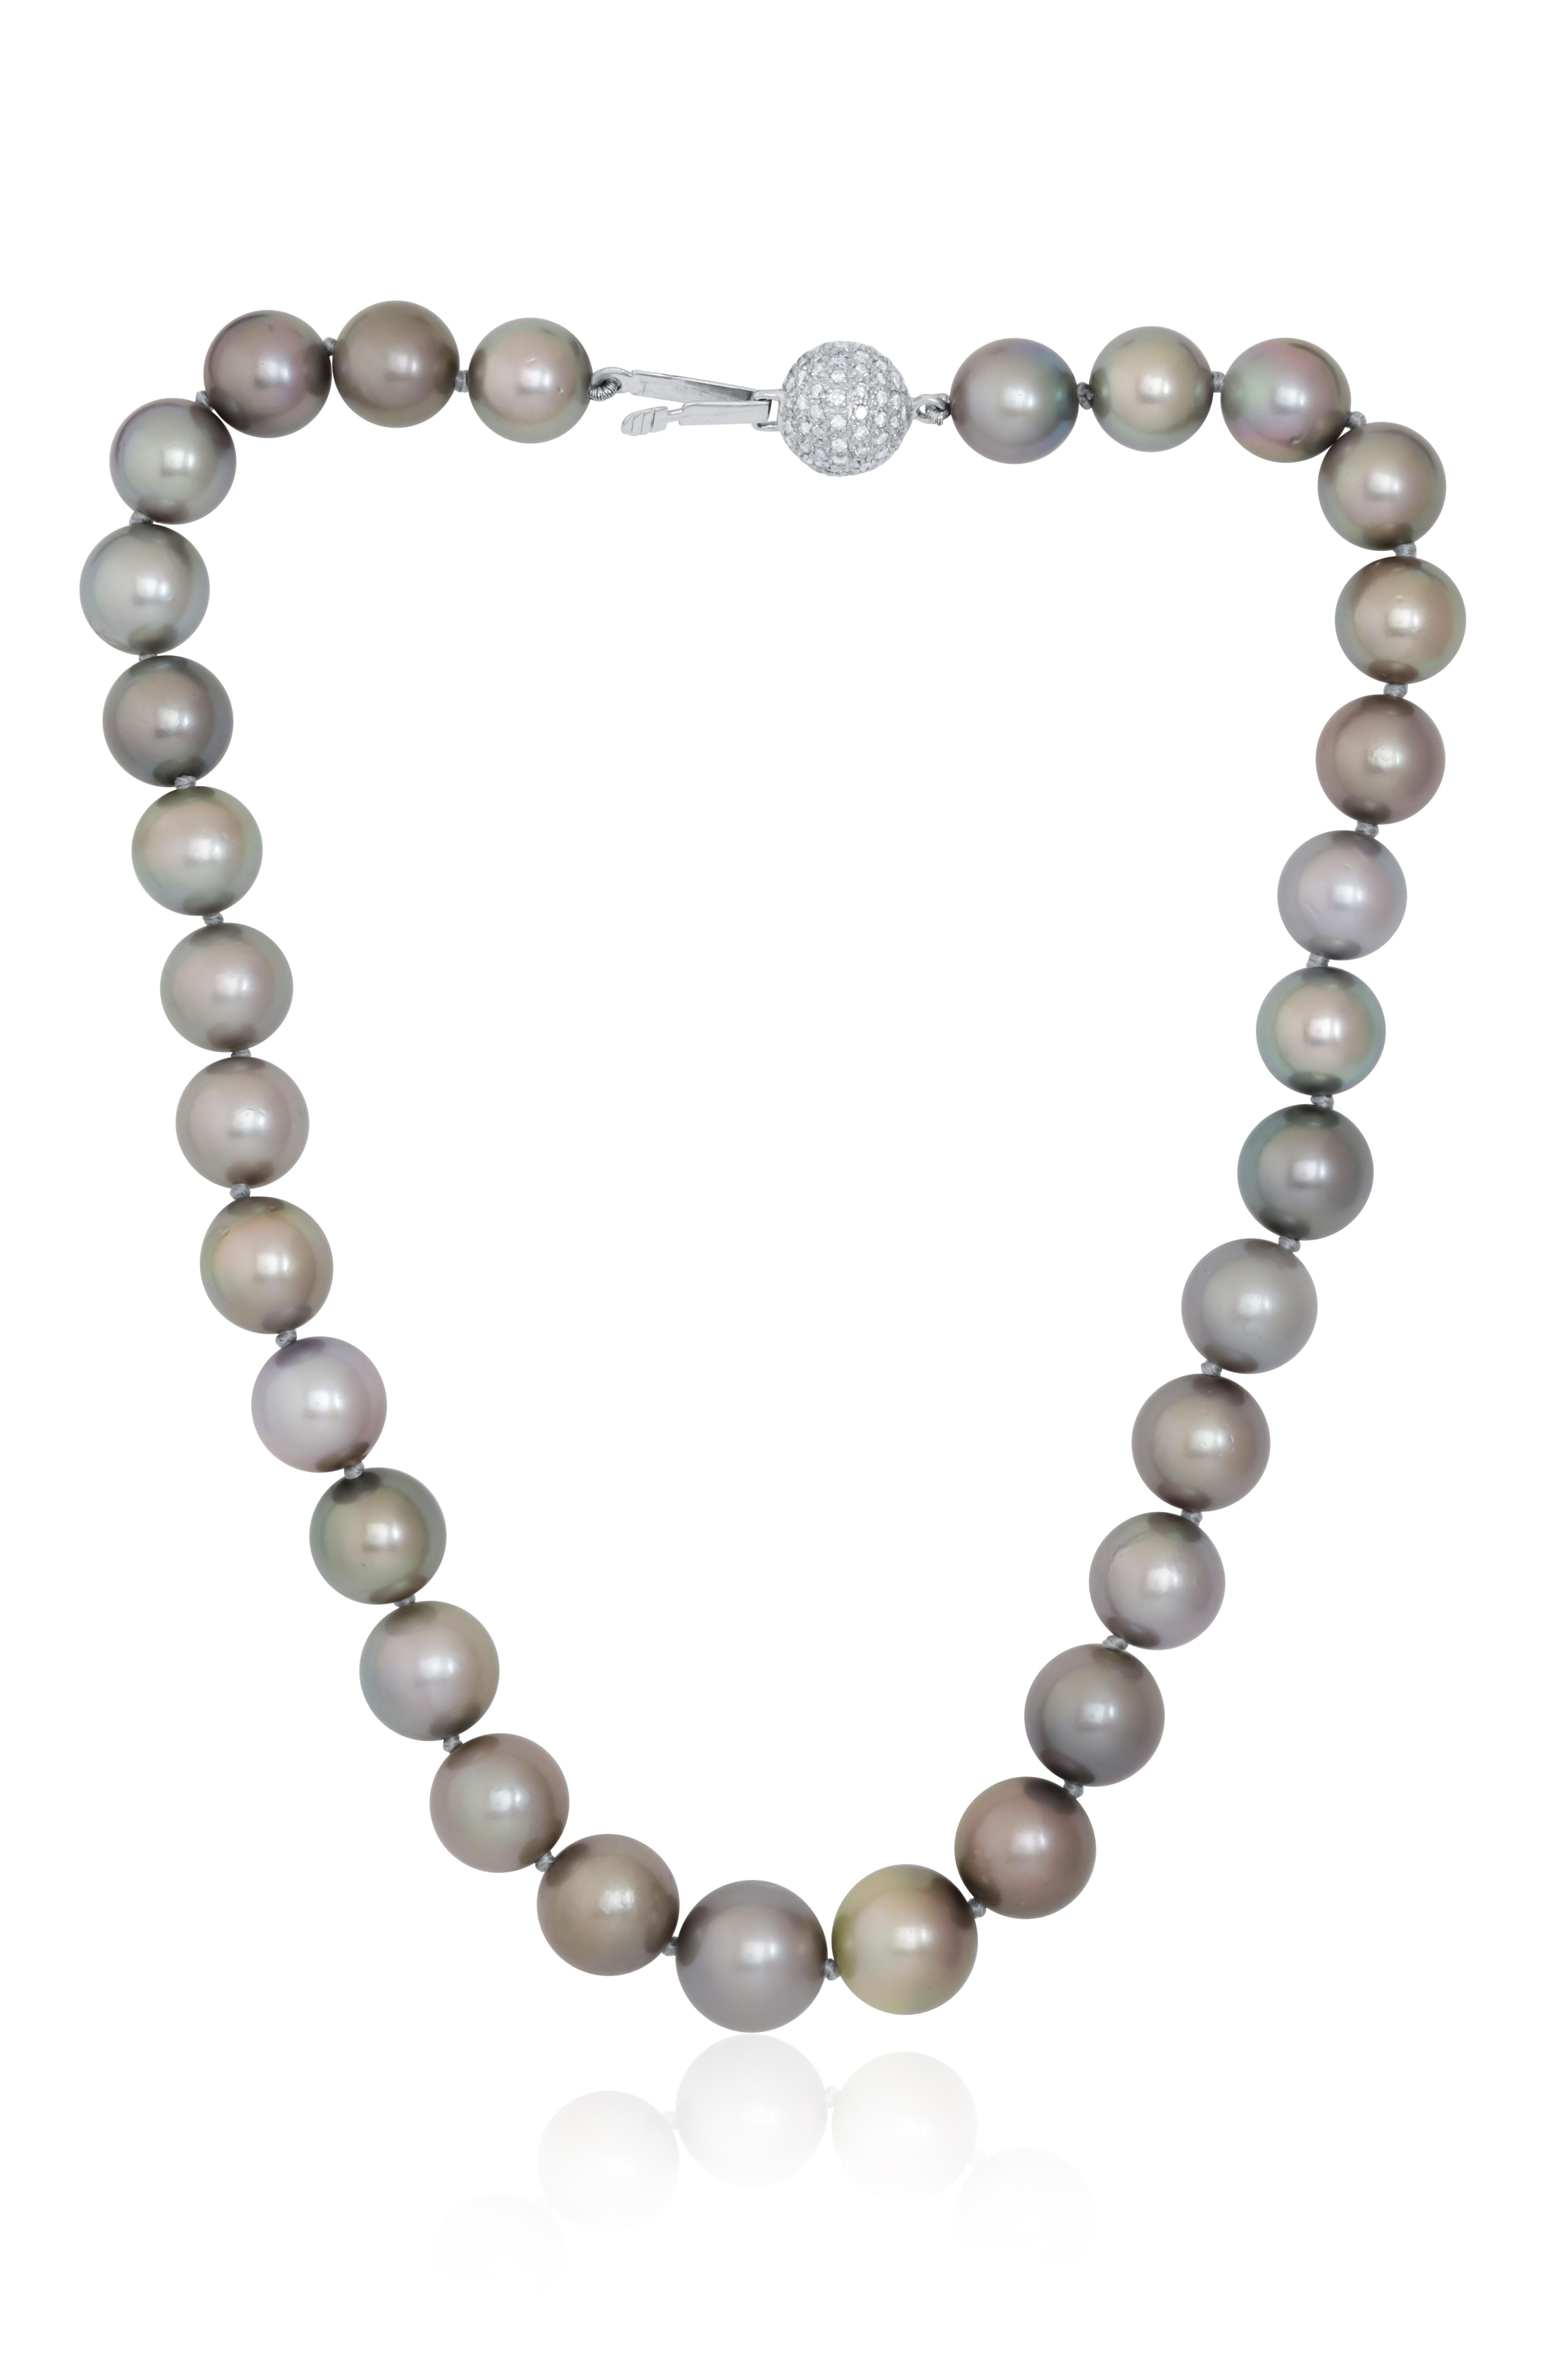 18 kt white gold pearl necklace adorned with black pearls and a clip containing 1.80 cts tw of diamonds
Diana M. is a leading supplier of top-quality fine jewelry for over 35 years.
Diana M is one-stop shop for all your jewelry shopping, carrying